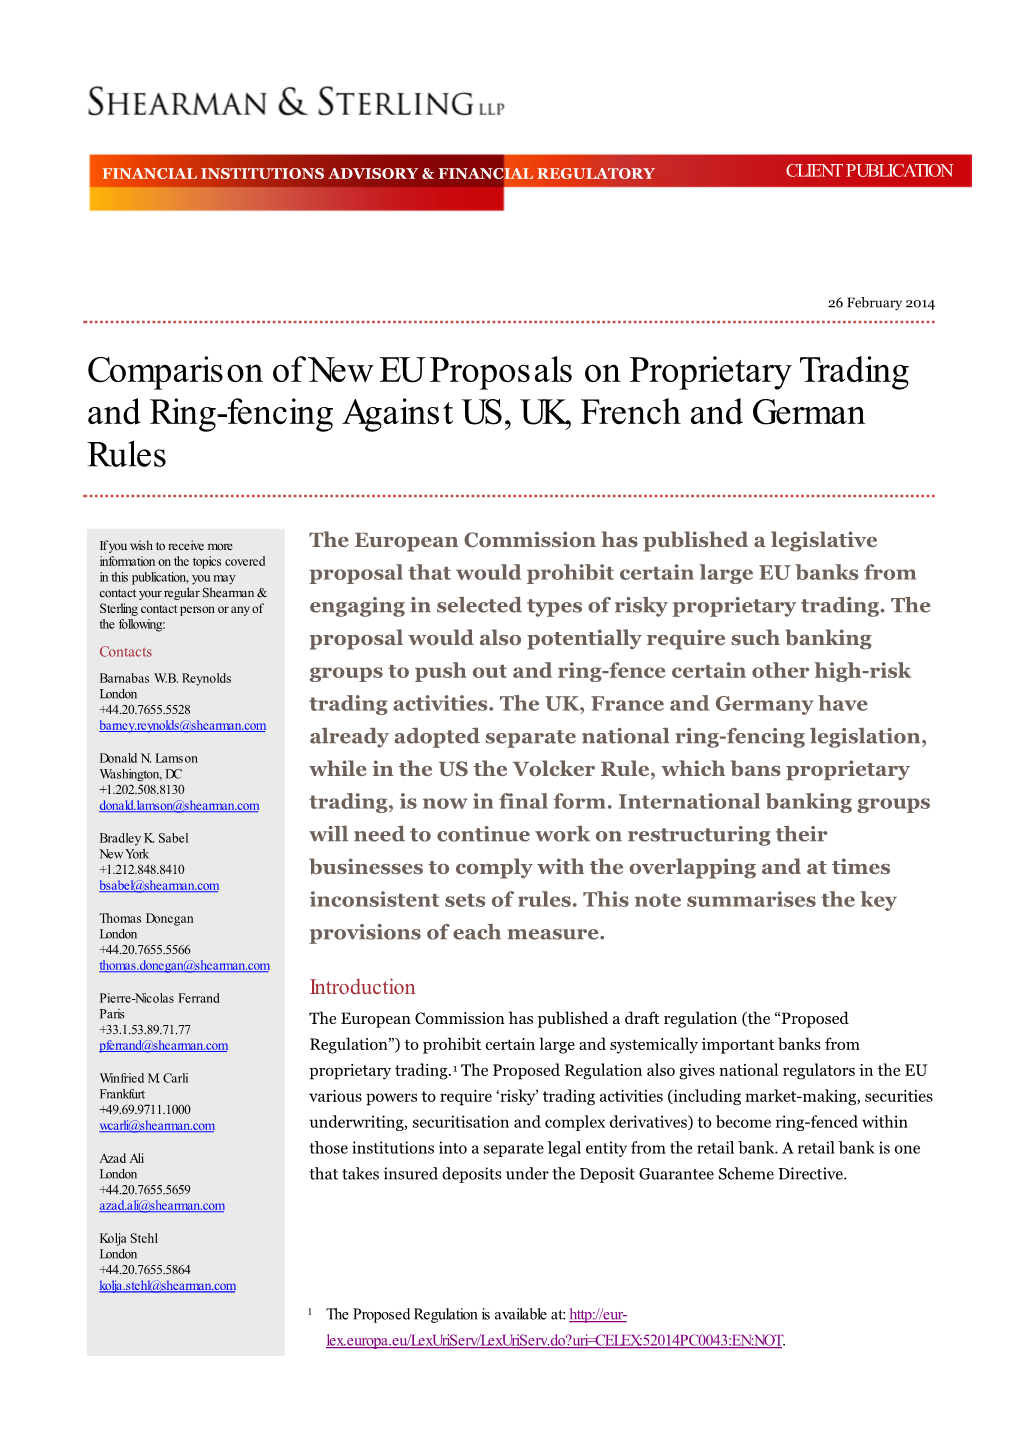 Comparison of New EU Proposals on Proprietary Trading and Ring-Fencing Against US, UK, French and German Rules